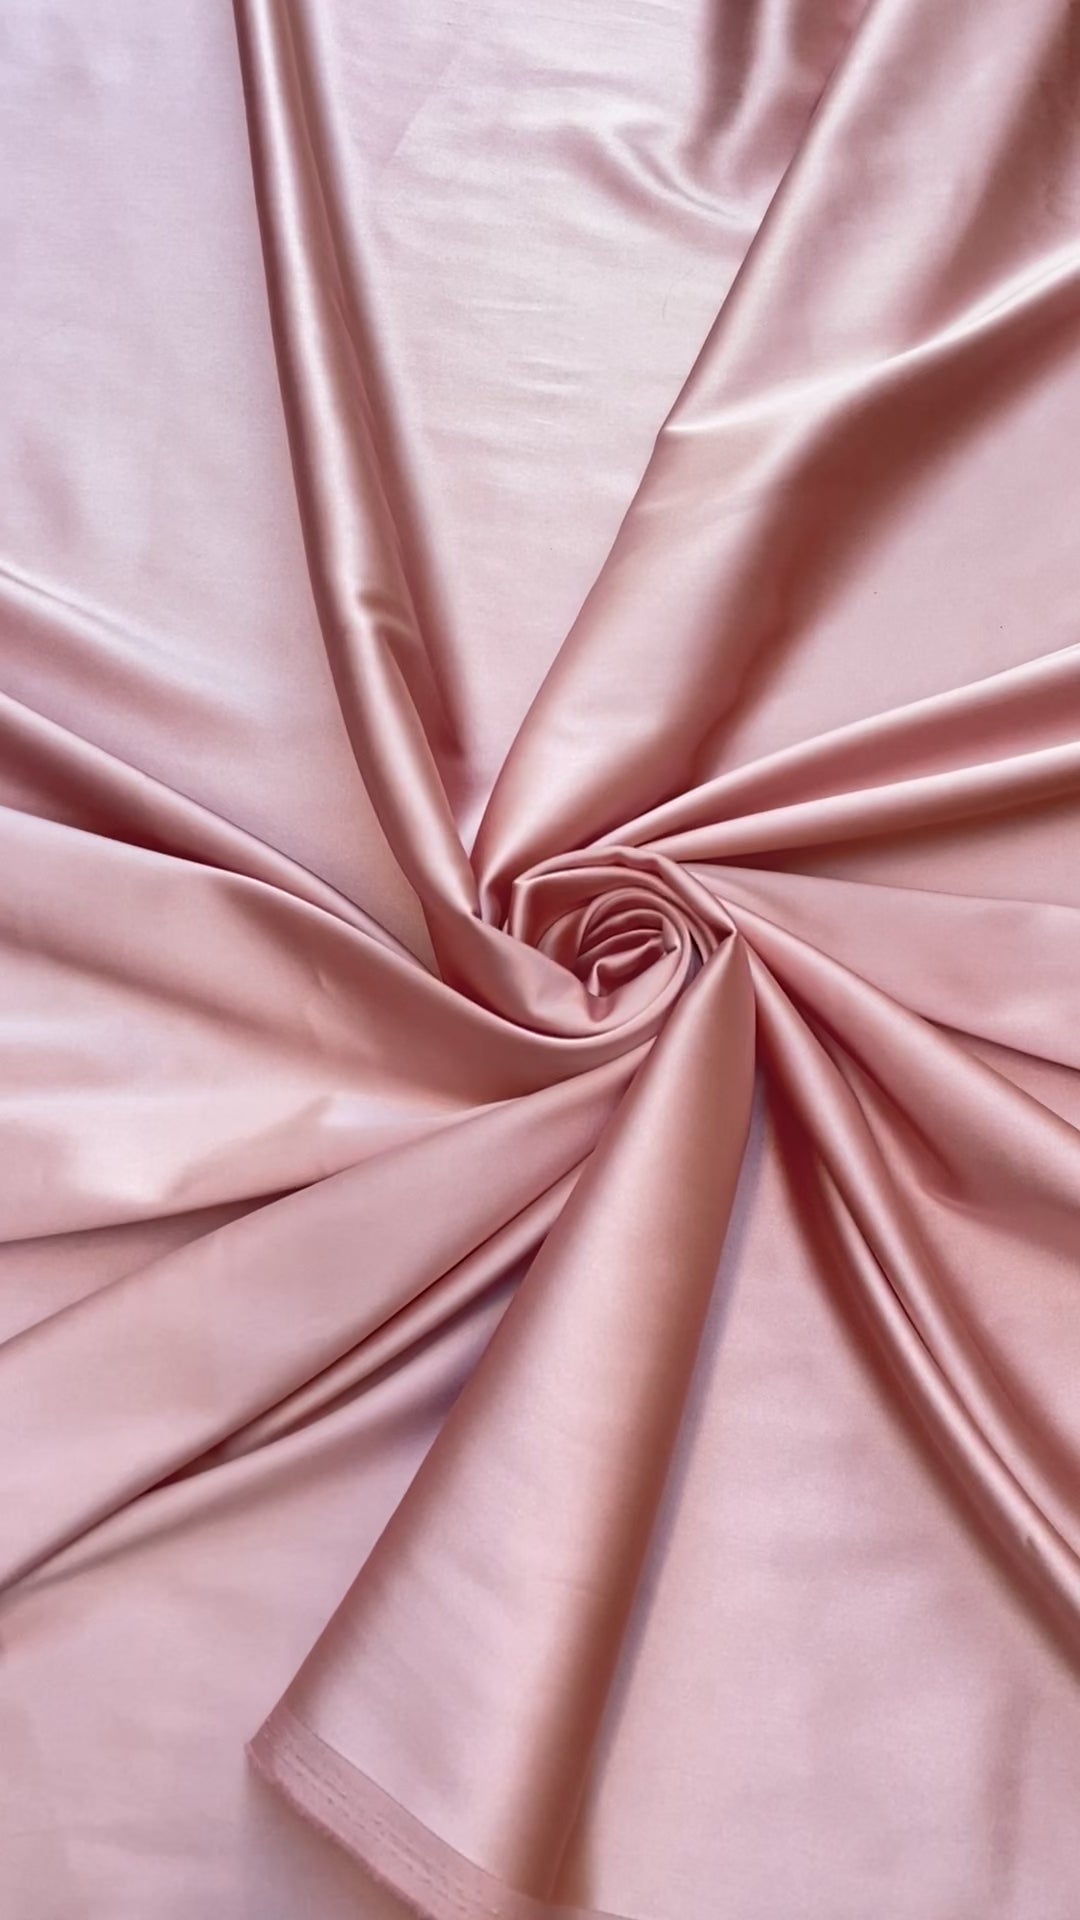 blush stretch crepe back satin, pink stretch crepe back satin, rose pink stretch crepe back satin, premium stretch crepe back satin, satin for bride, satin for woman, satin in low price, cheap satin, satin on sale